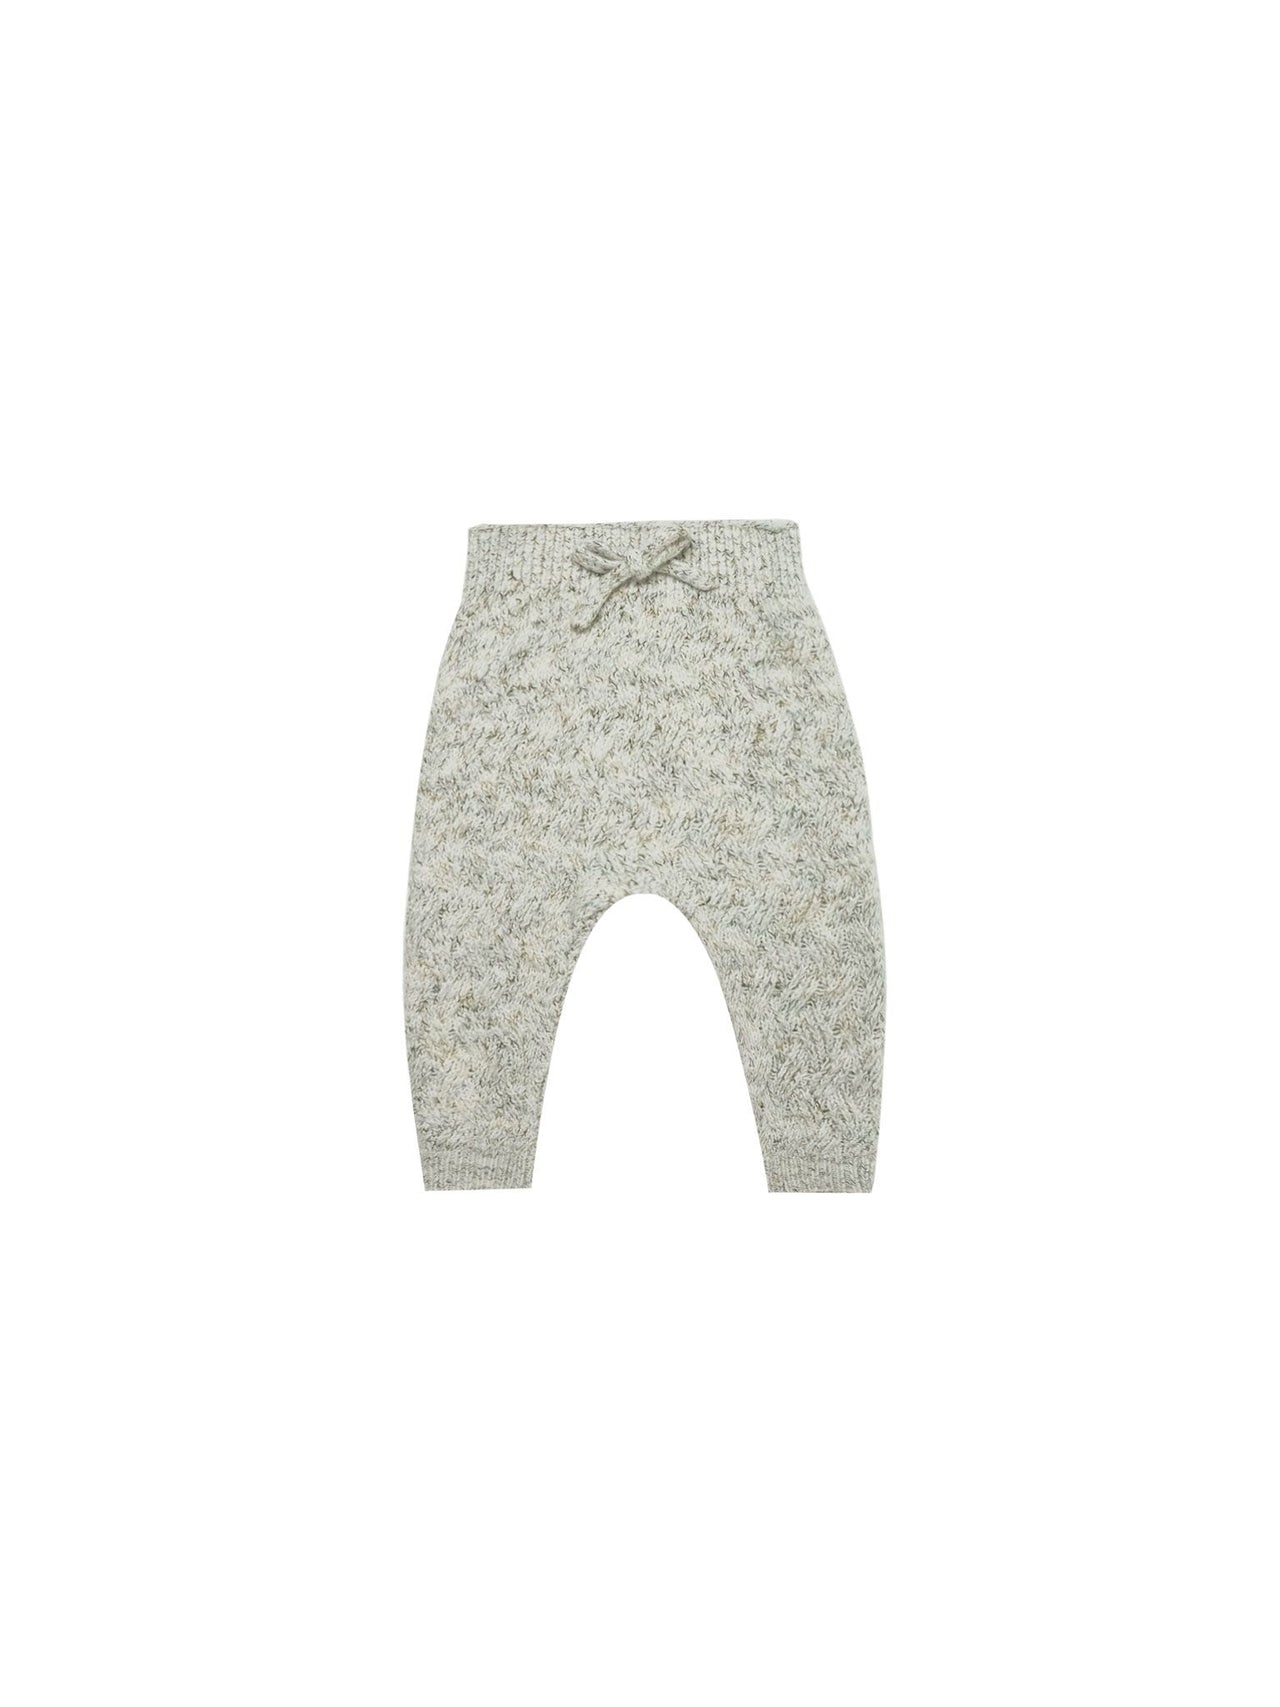 Quincy Mae Heathered Knit Pant, Fern